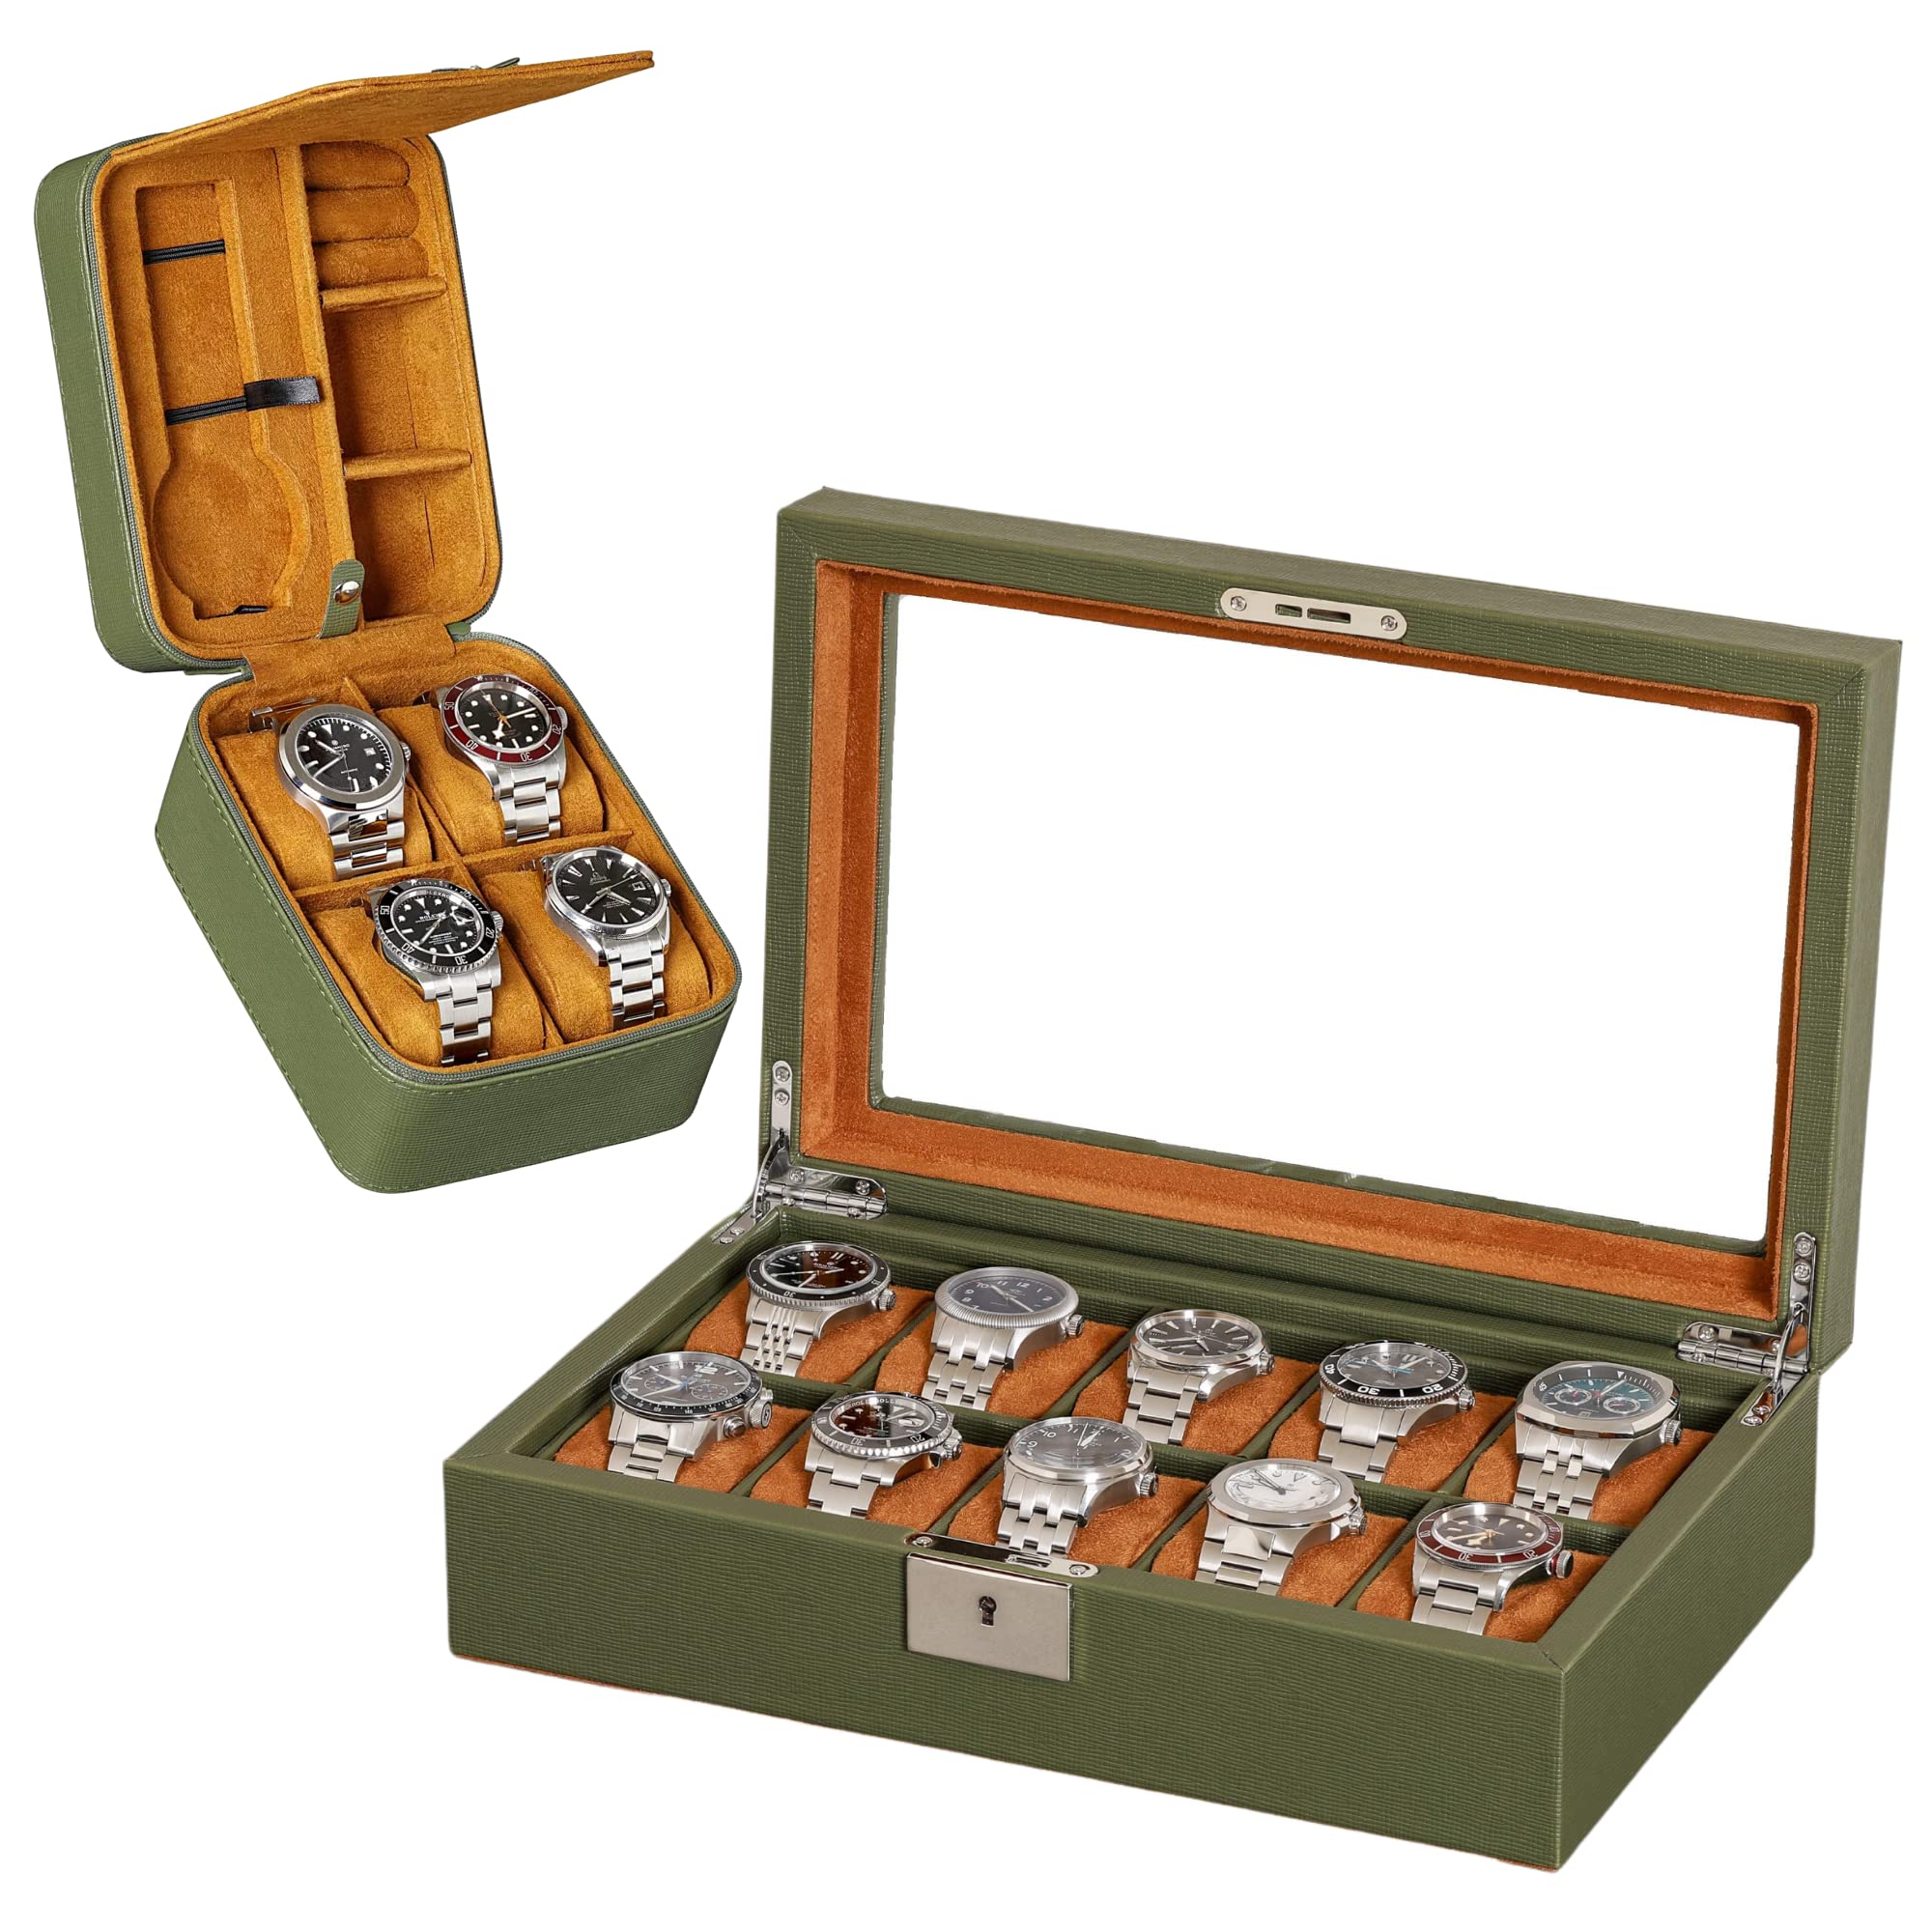 ROTHWELL Gift Set 10 Slot Leather Watch Box & Matching 5 Watch Travel Case - Luxury Watch Case Display Organizer, Locking Mens Jewelry Watches Holder, Men's Storage Boxes Glass Top Green/Tan